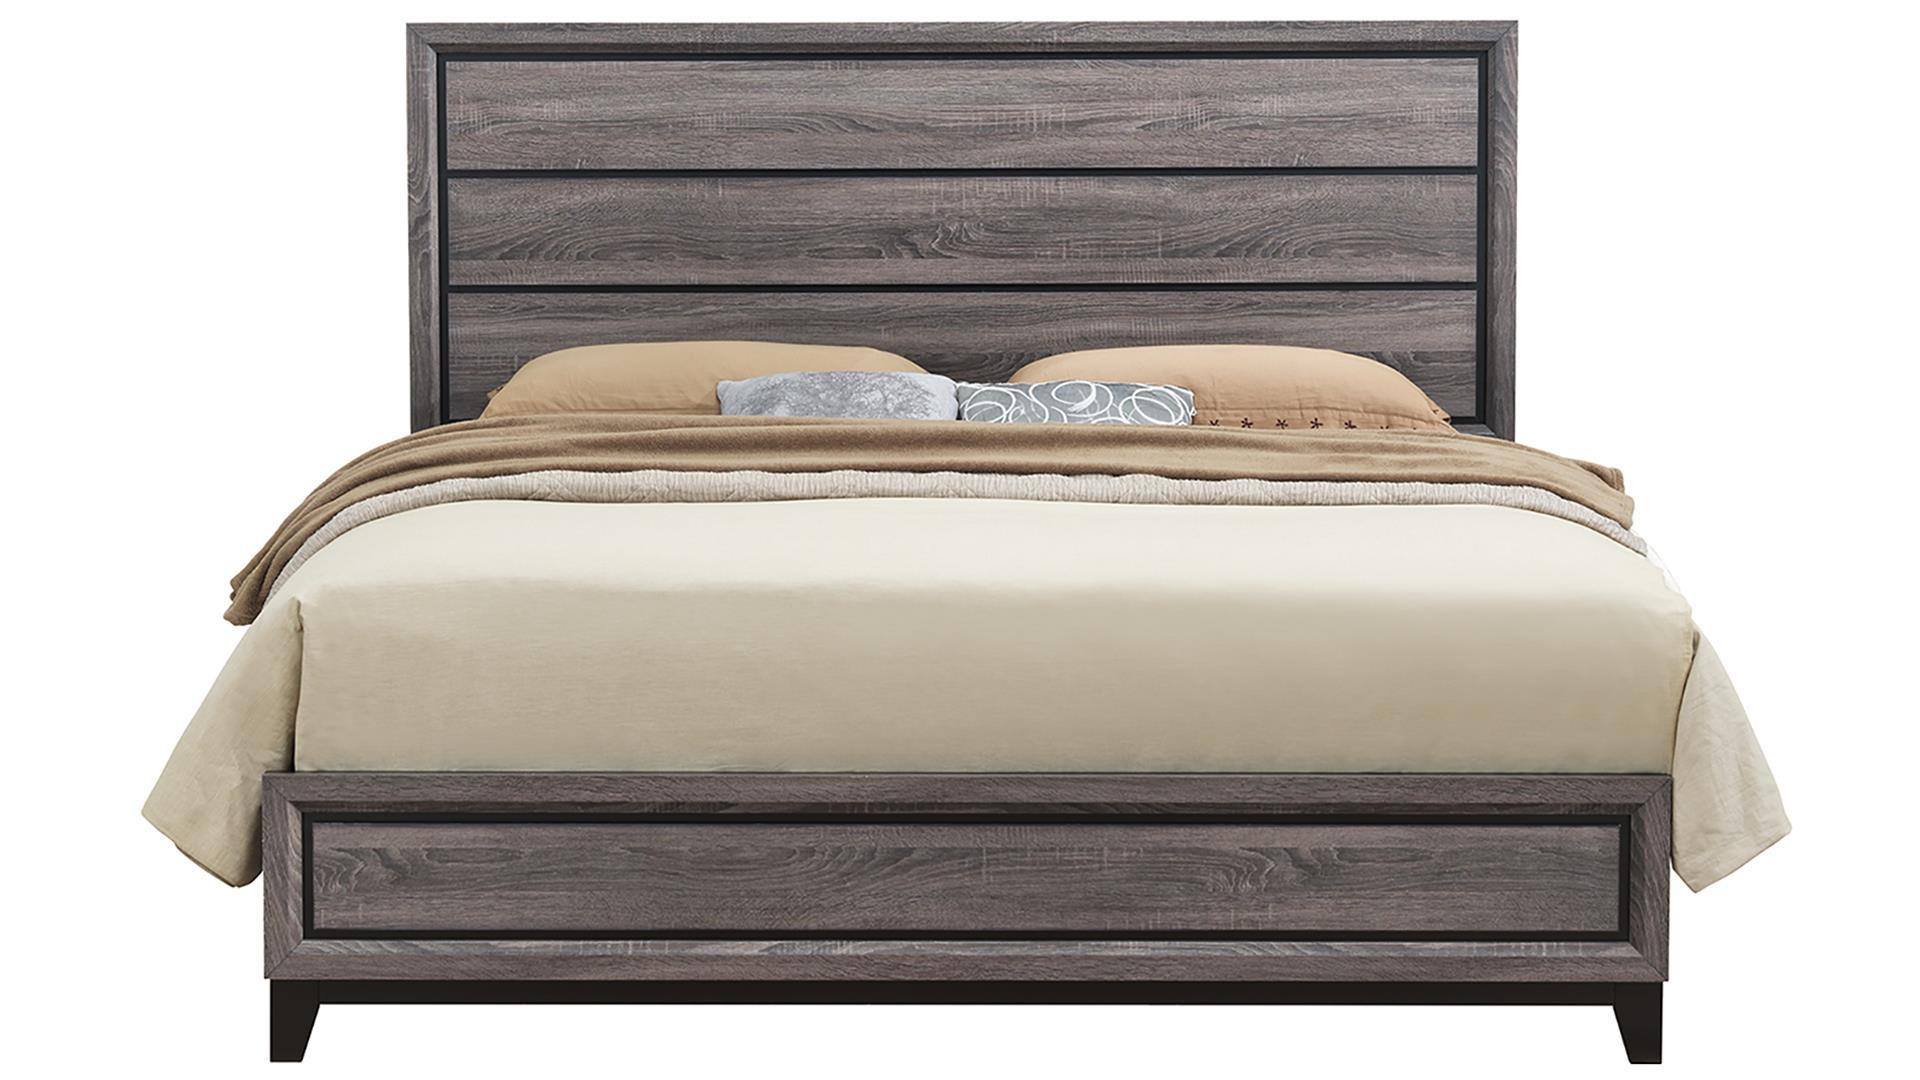 

    
KATE Beach Wood Grey Finish Casual King Size Bed Global US
